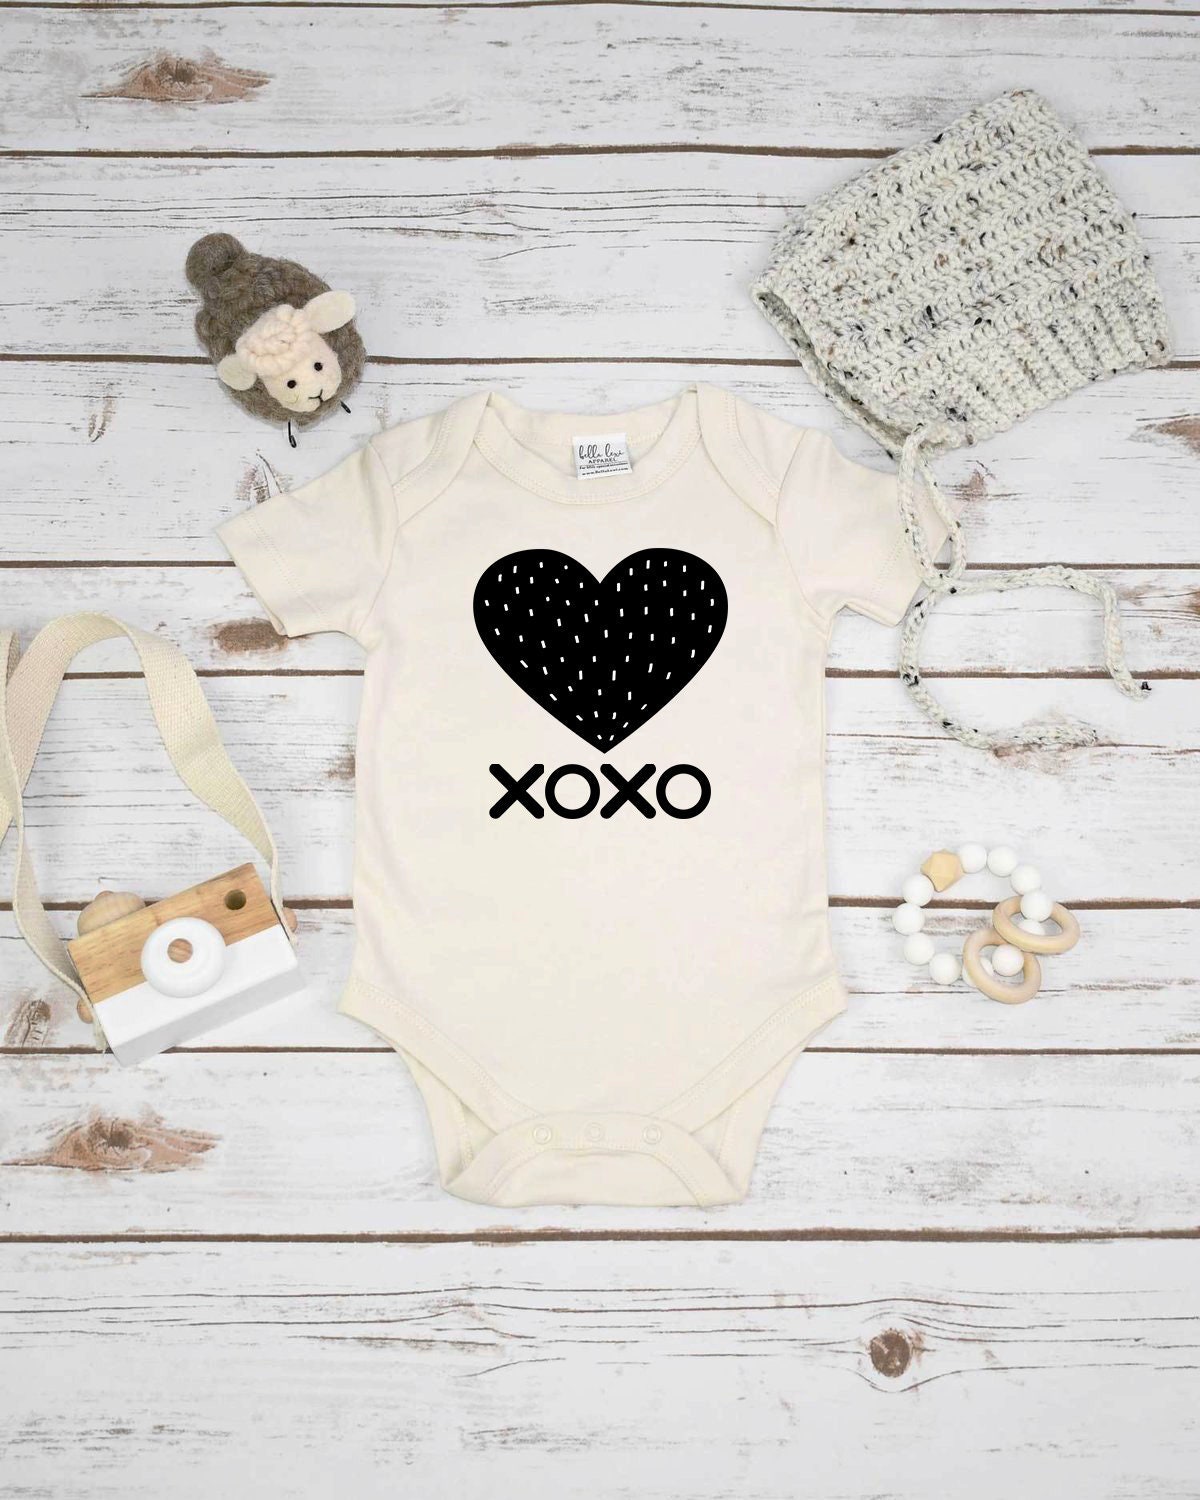 Baby Shower Gift, XOXO, Organic Baby Gift, Baby Shower Gift, Rainbow Baby, Organic Baby, Organic Bodysuit, Organic Baby Clothes, Easter Gift